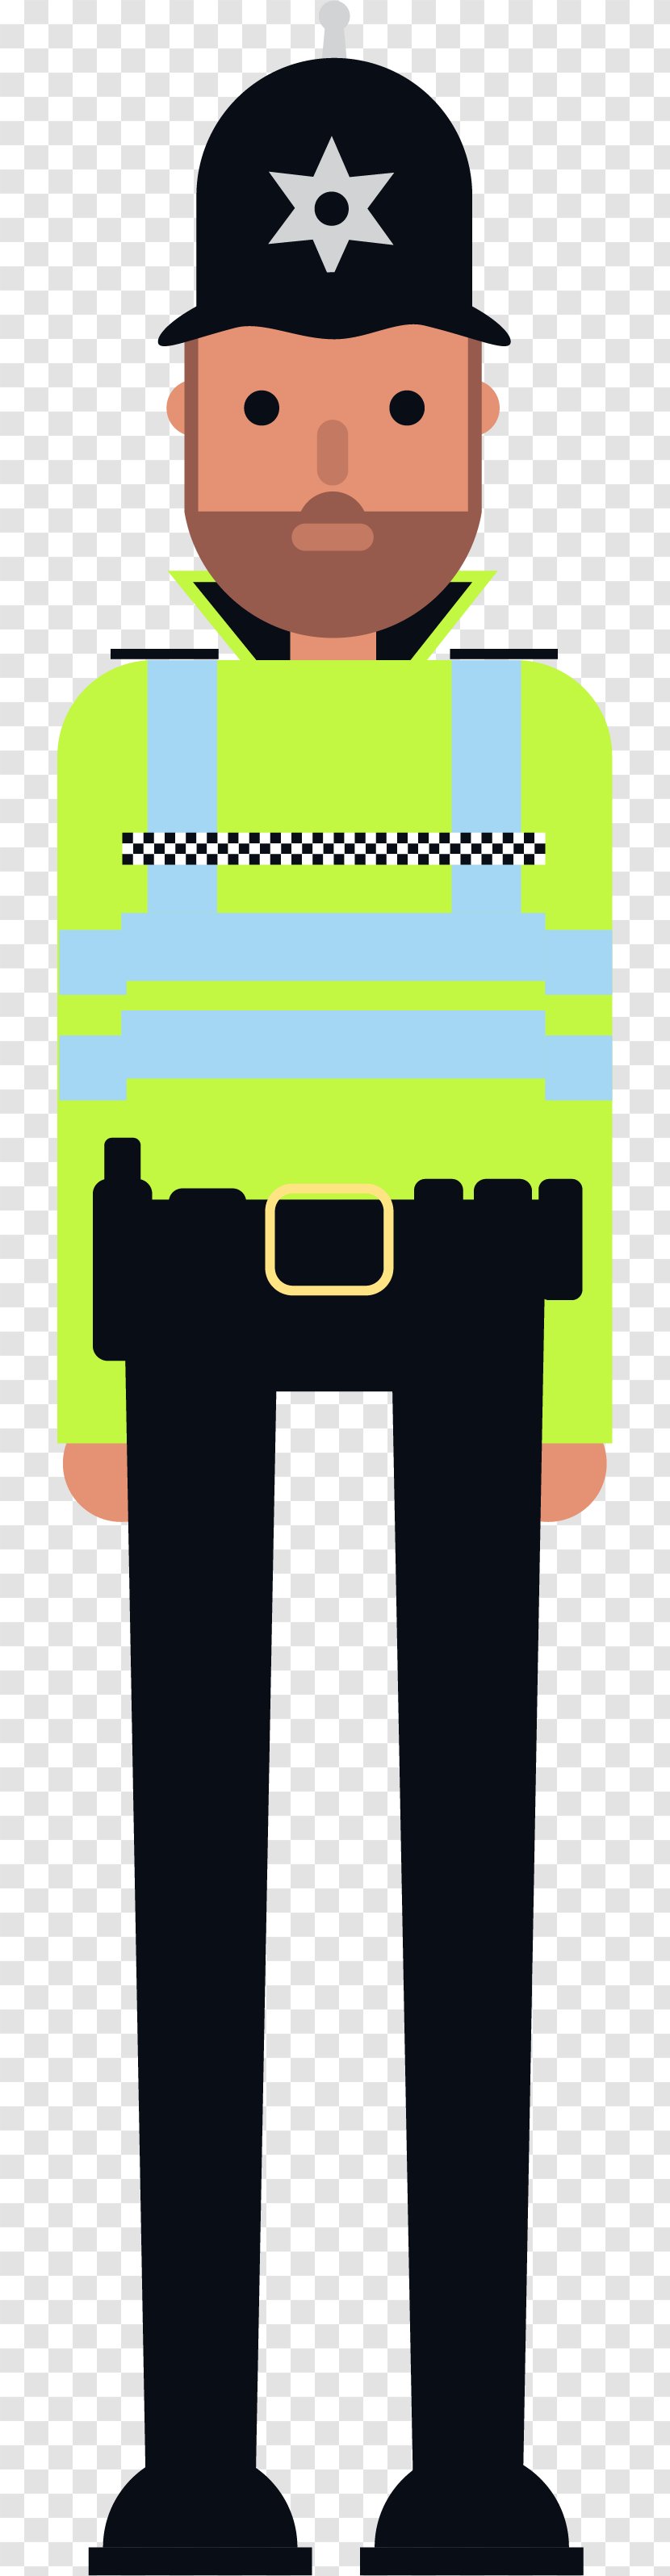 Cartoon Police Officer Drawing - Fictional Character Transparent PNG